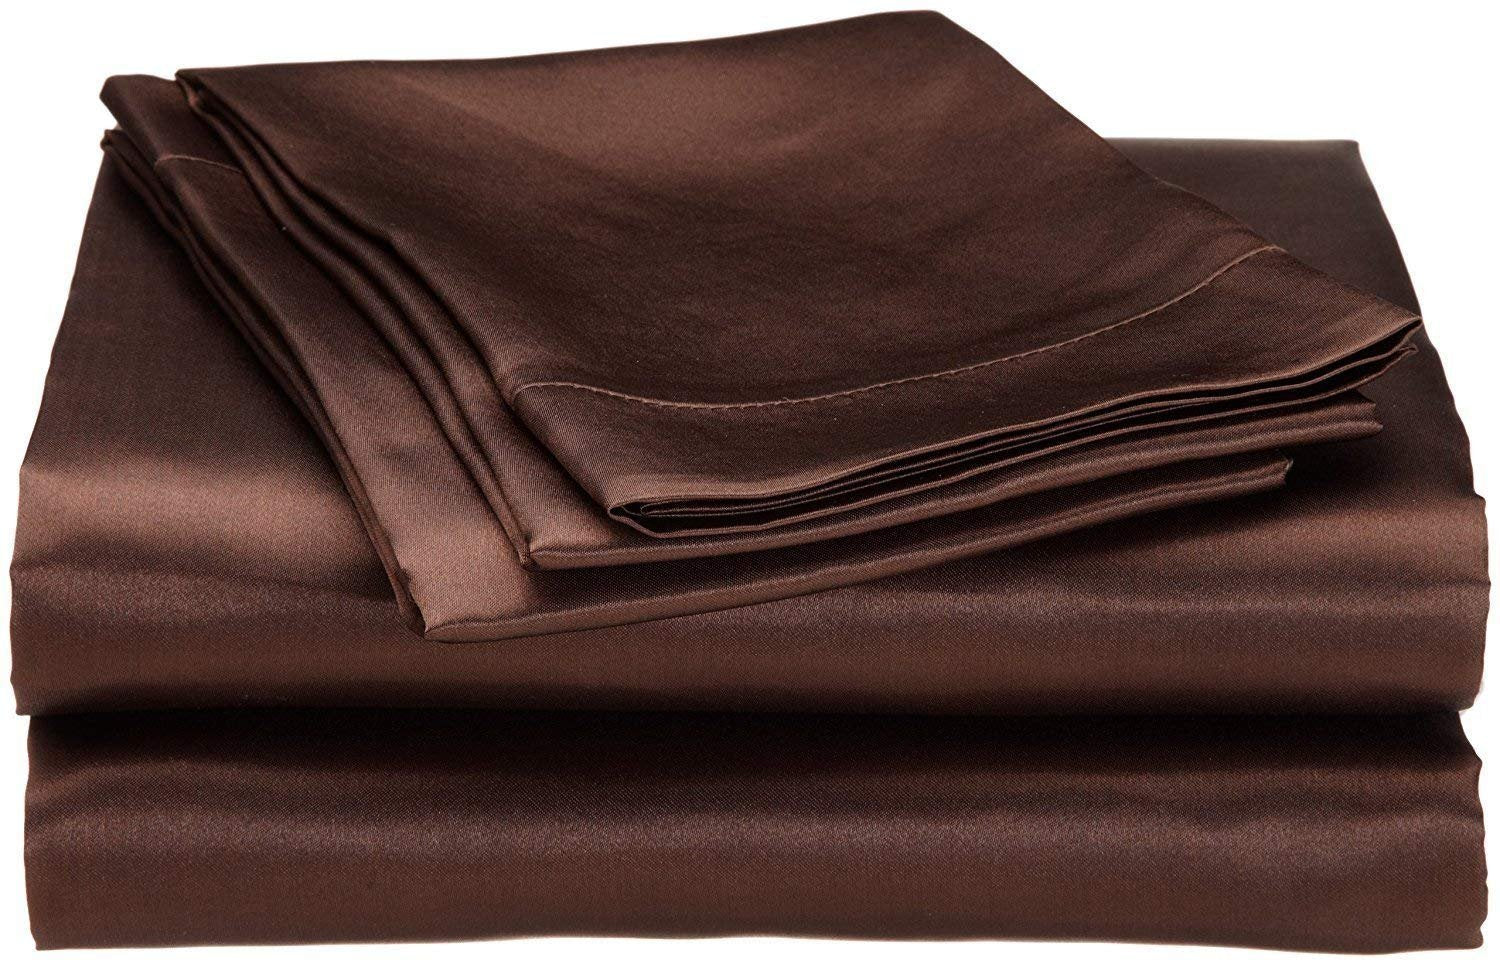 12 Inch Pocket Sheet Set Mulberry Sateen Silk Chocolate at-www.egyptianhomelinens.com